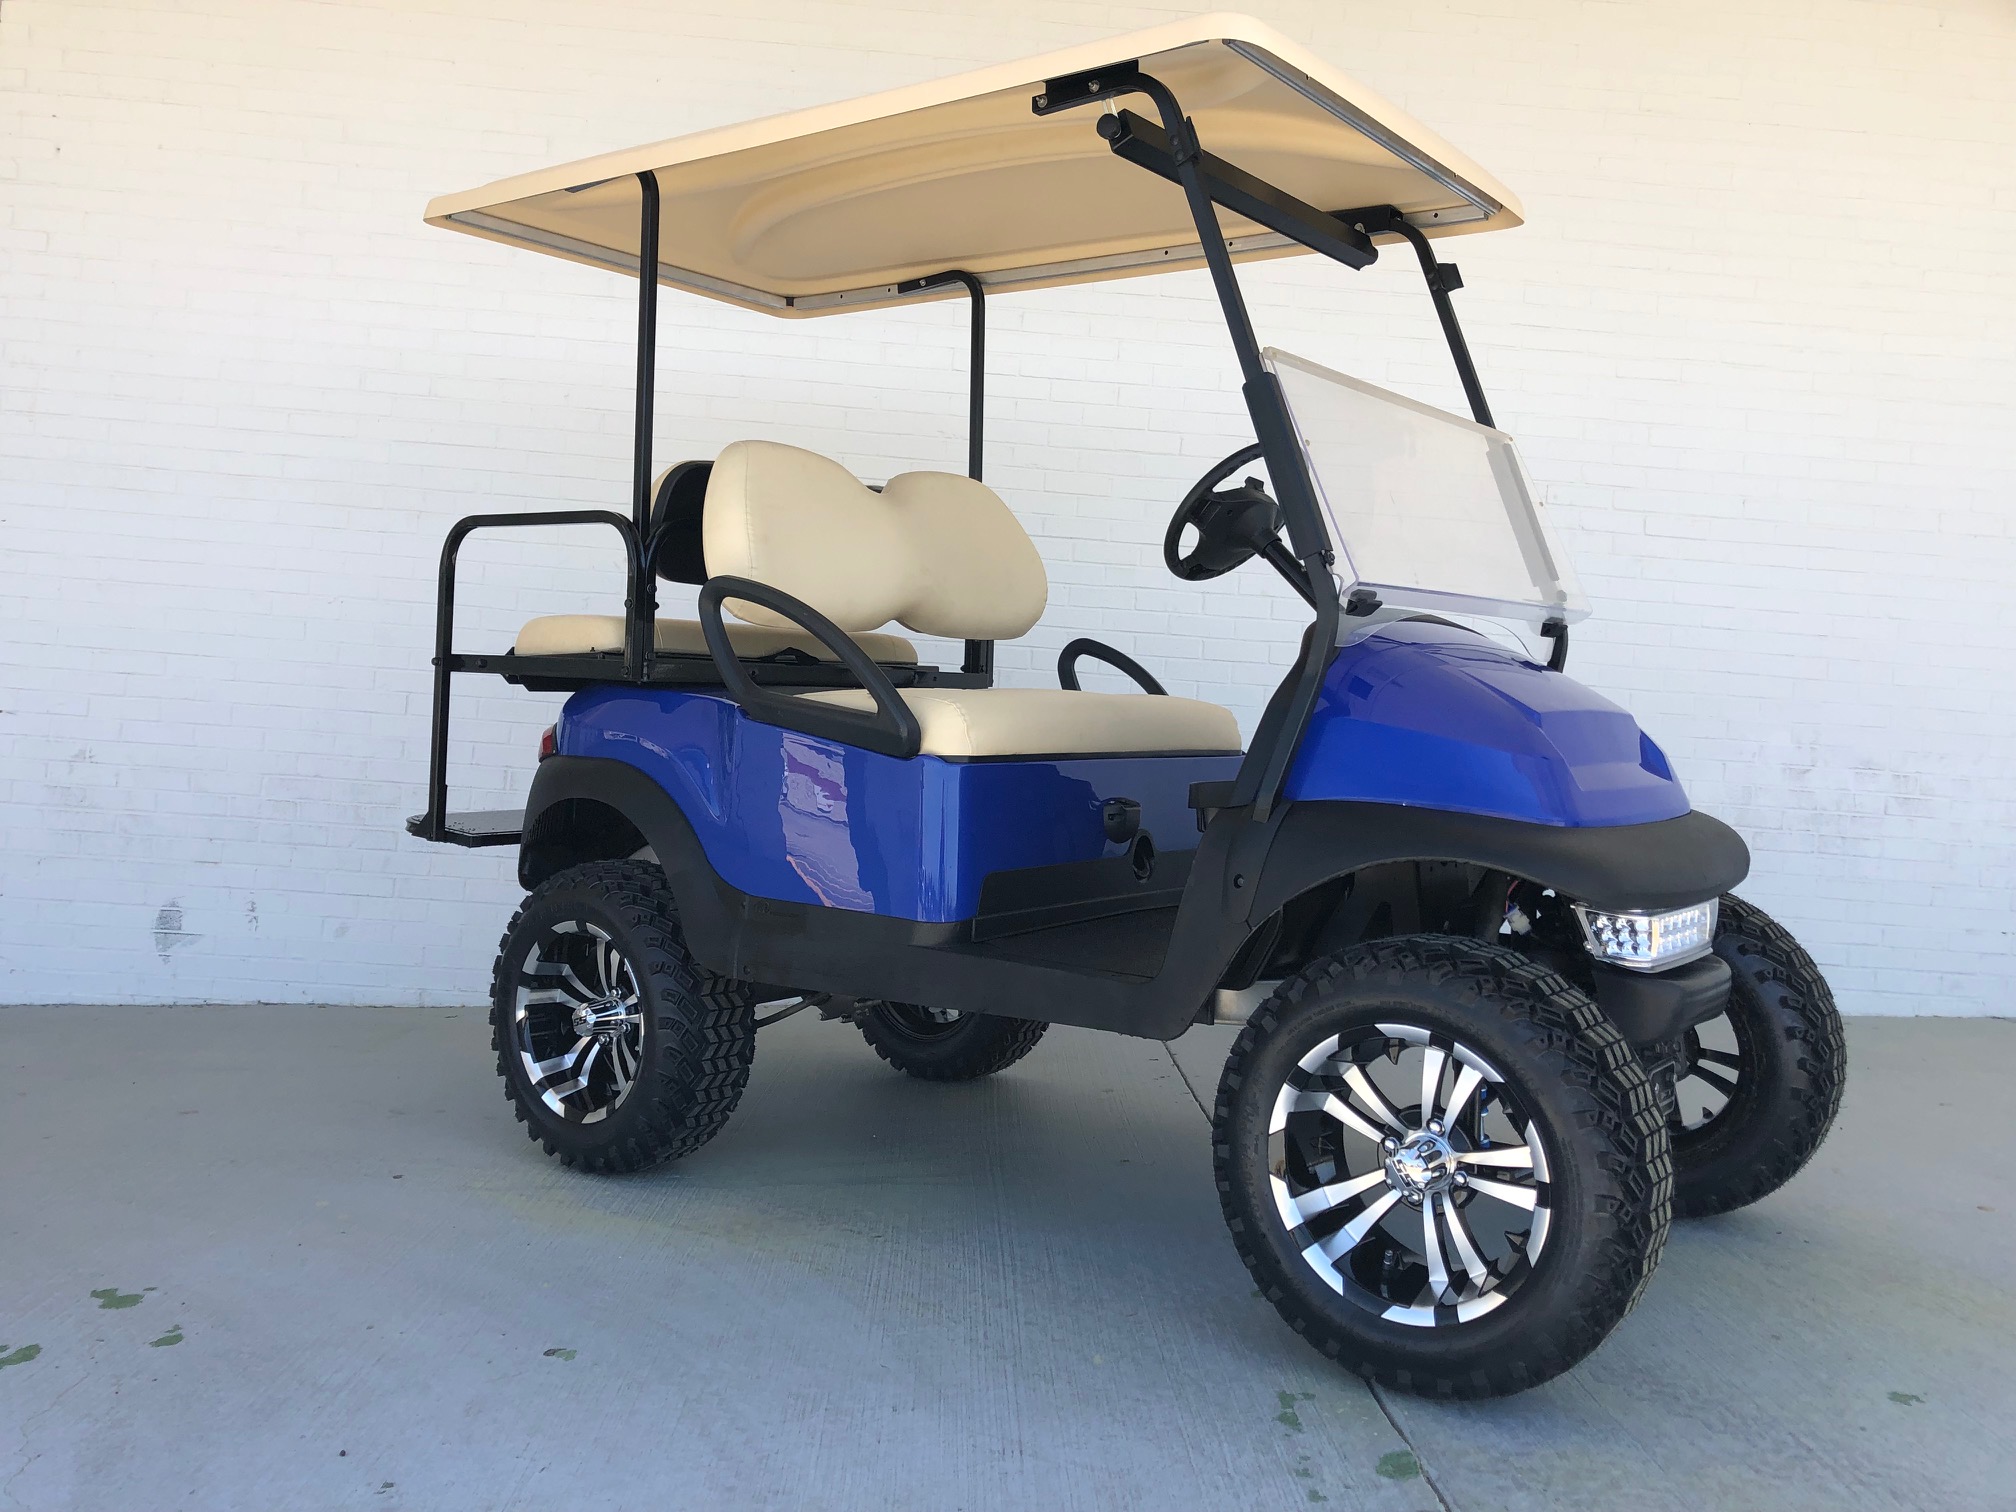 Blue Extended Top Lifted Club Car Precedent